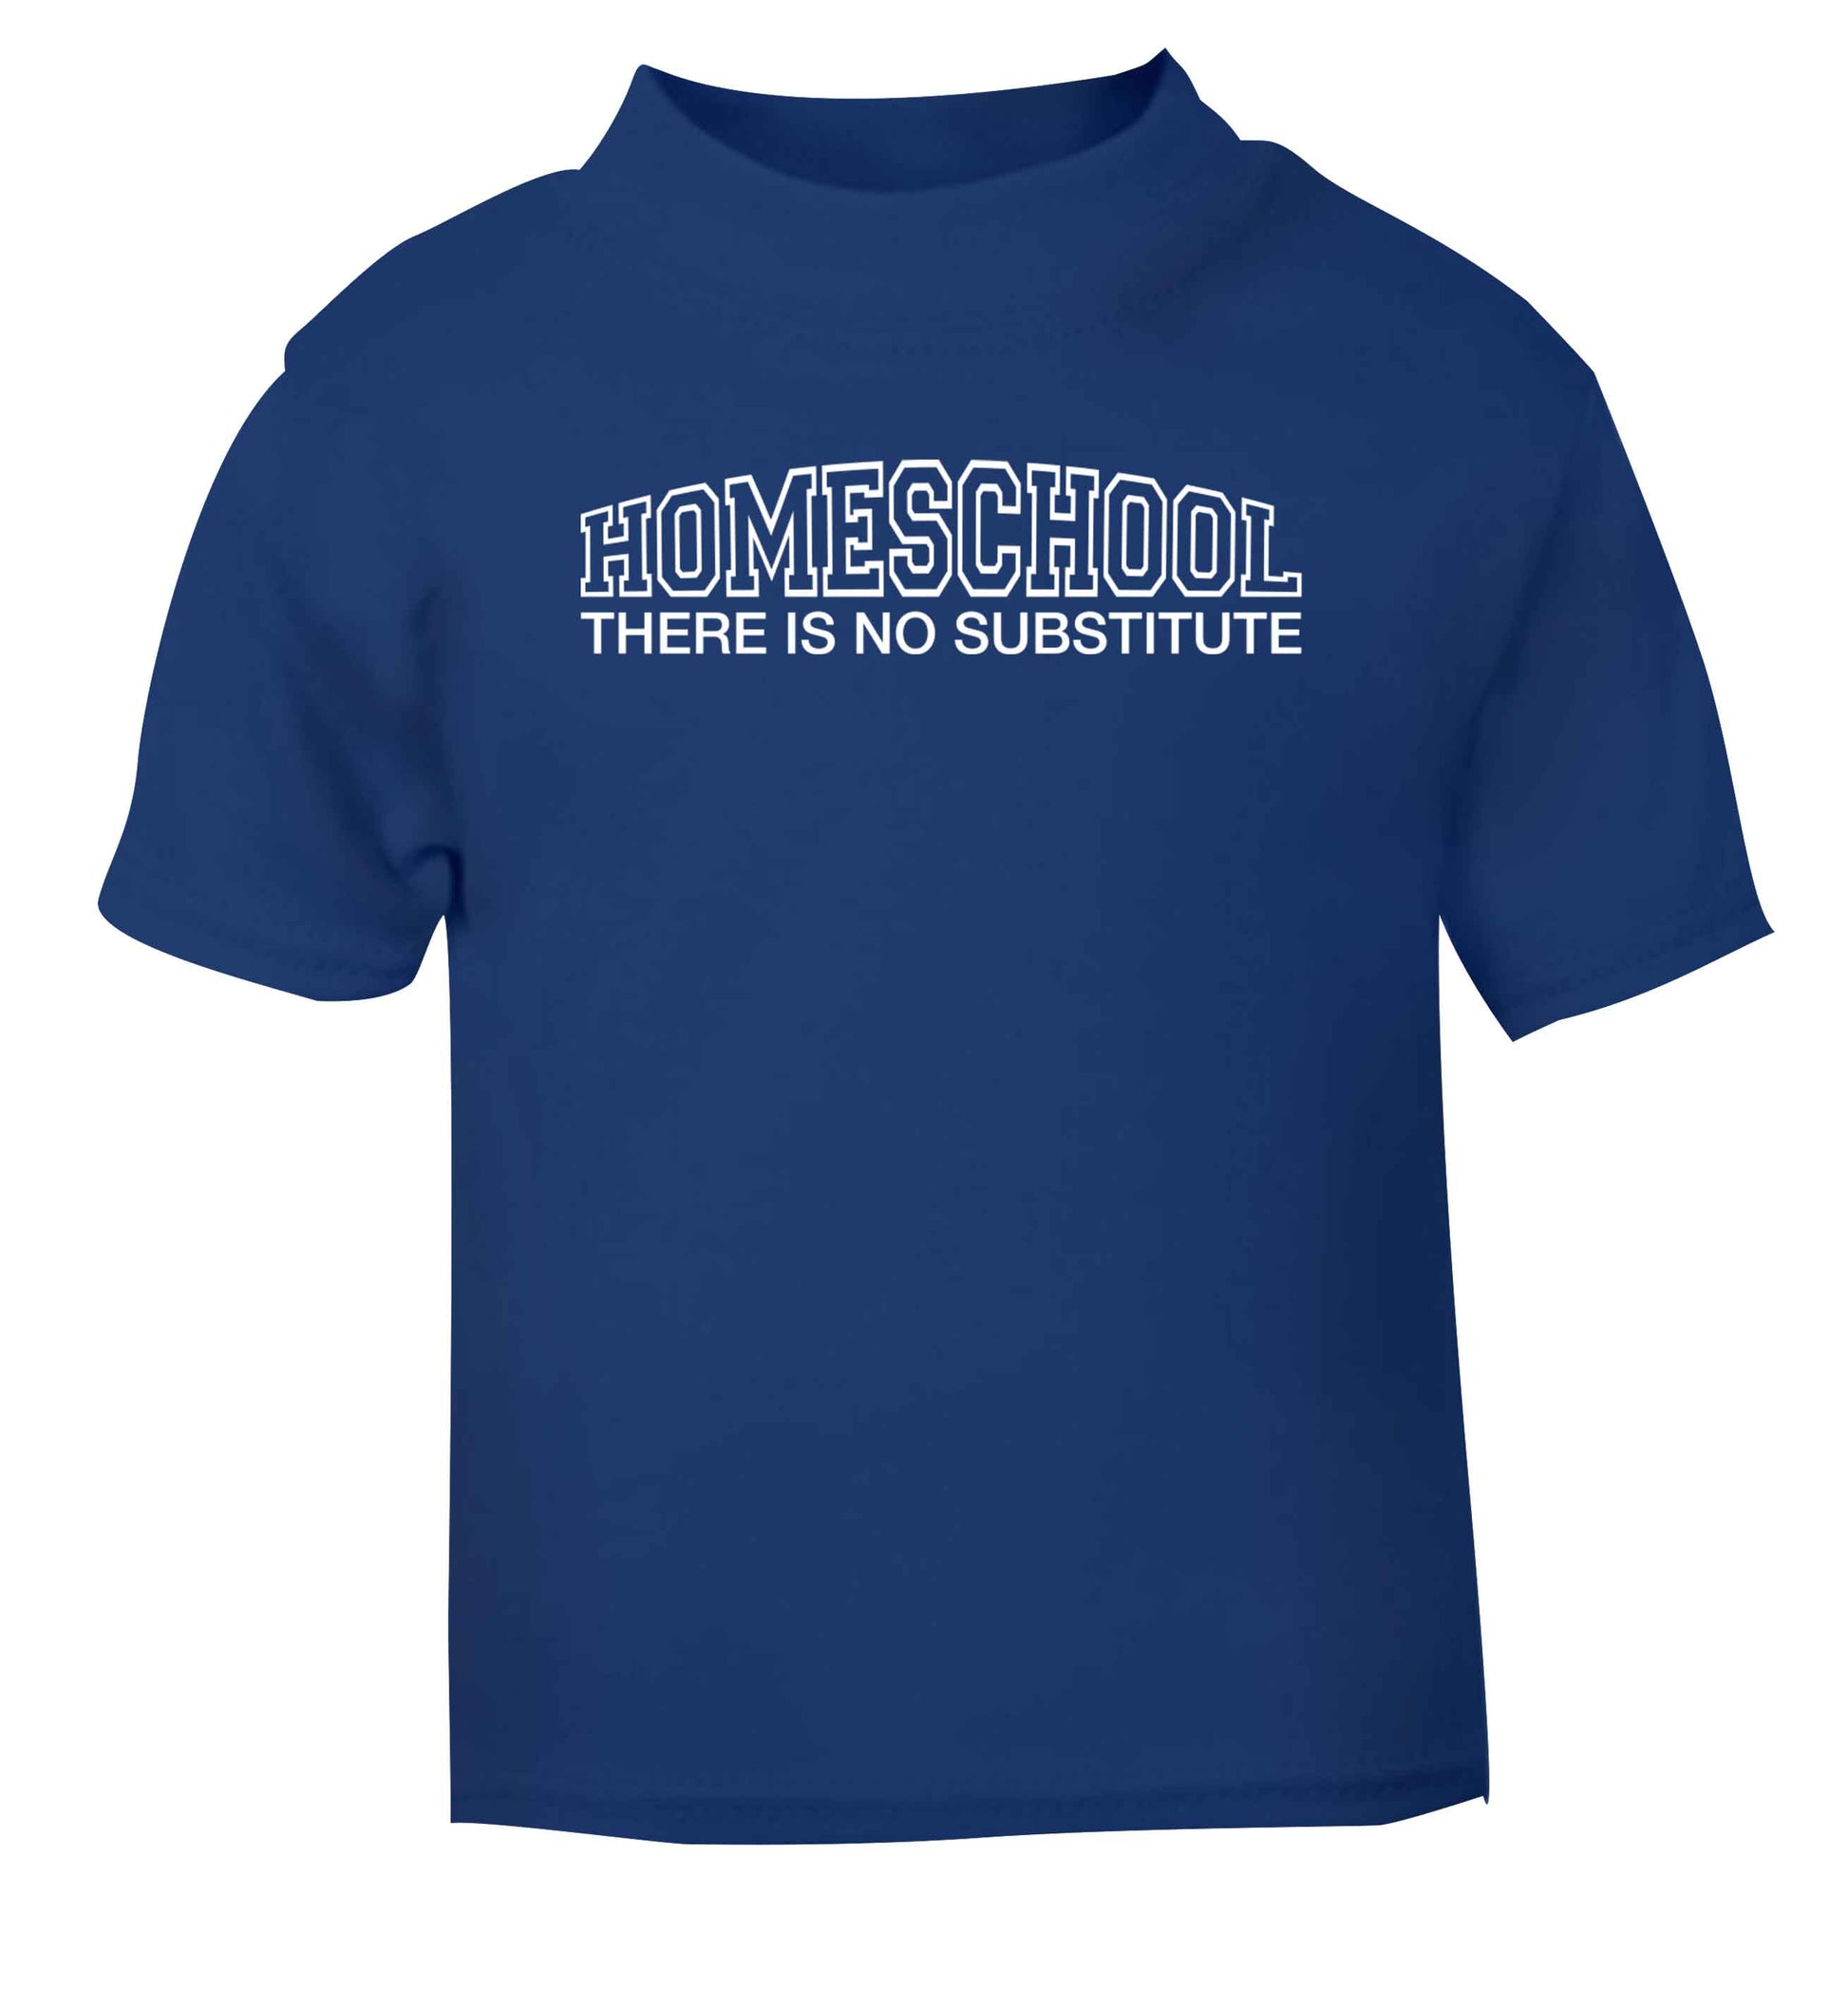 Homeschool there is not substitute blue Baby Toddler Tshirt 2 Years